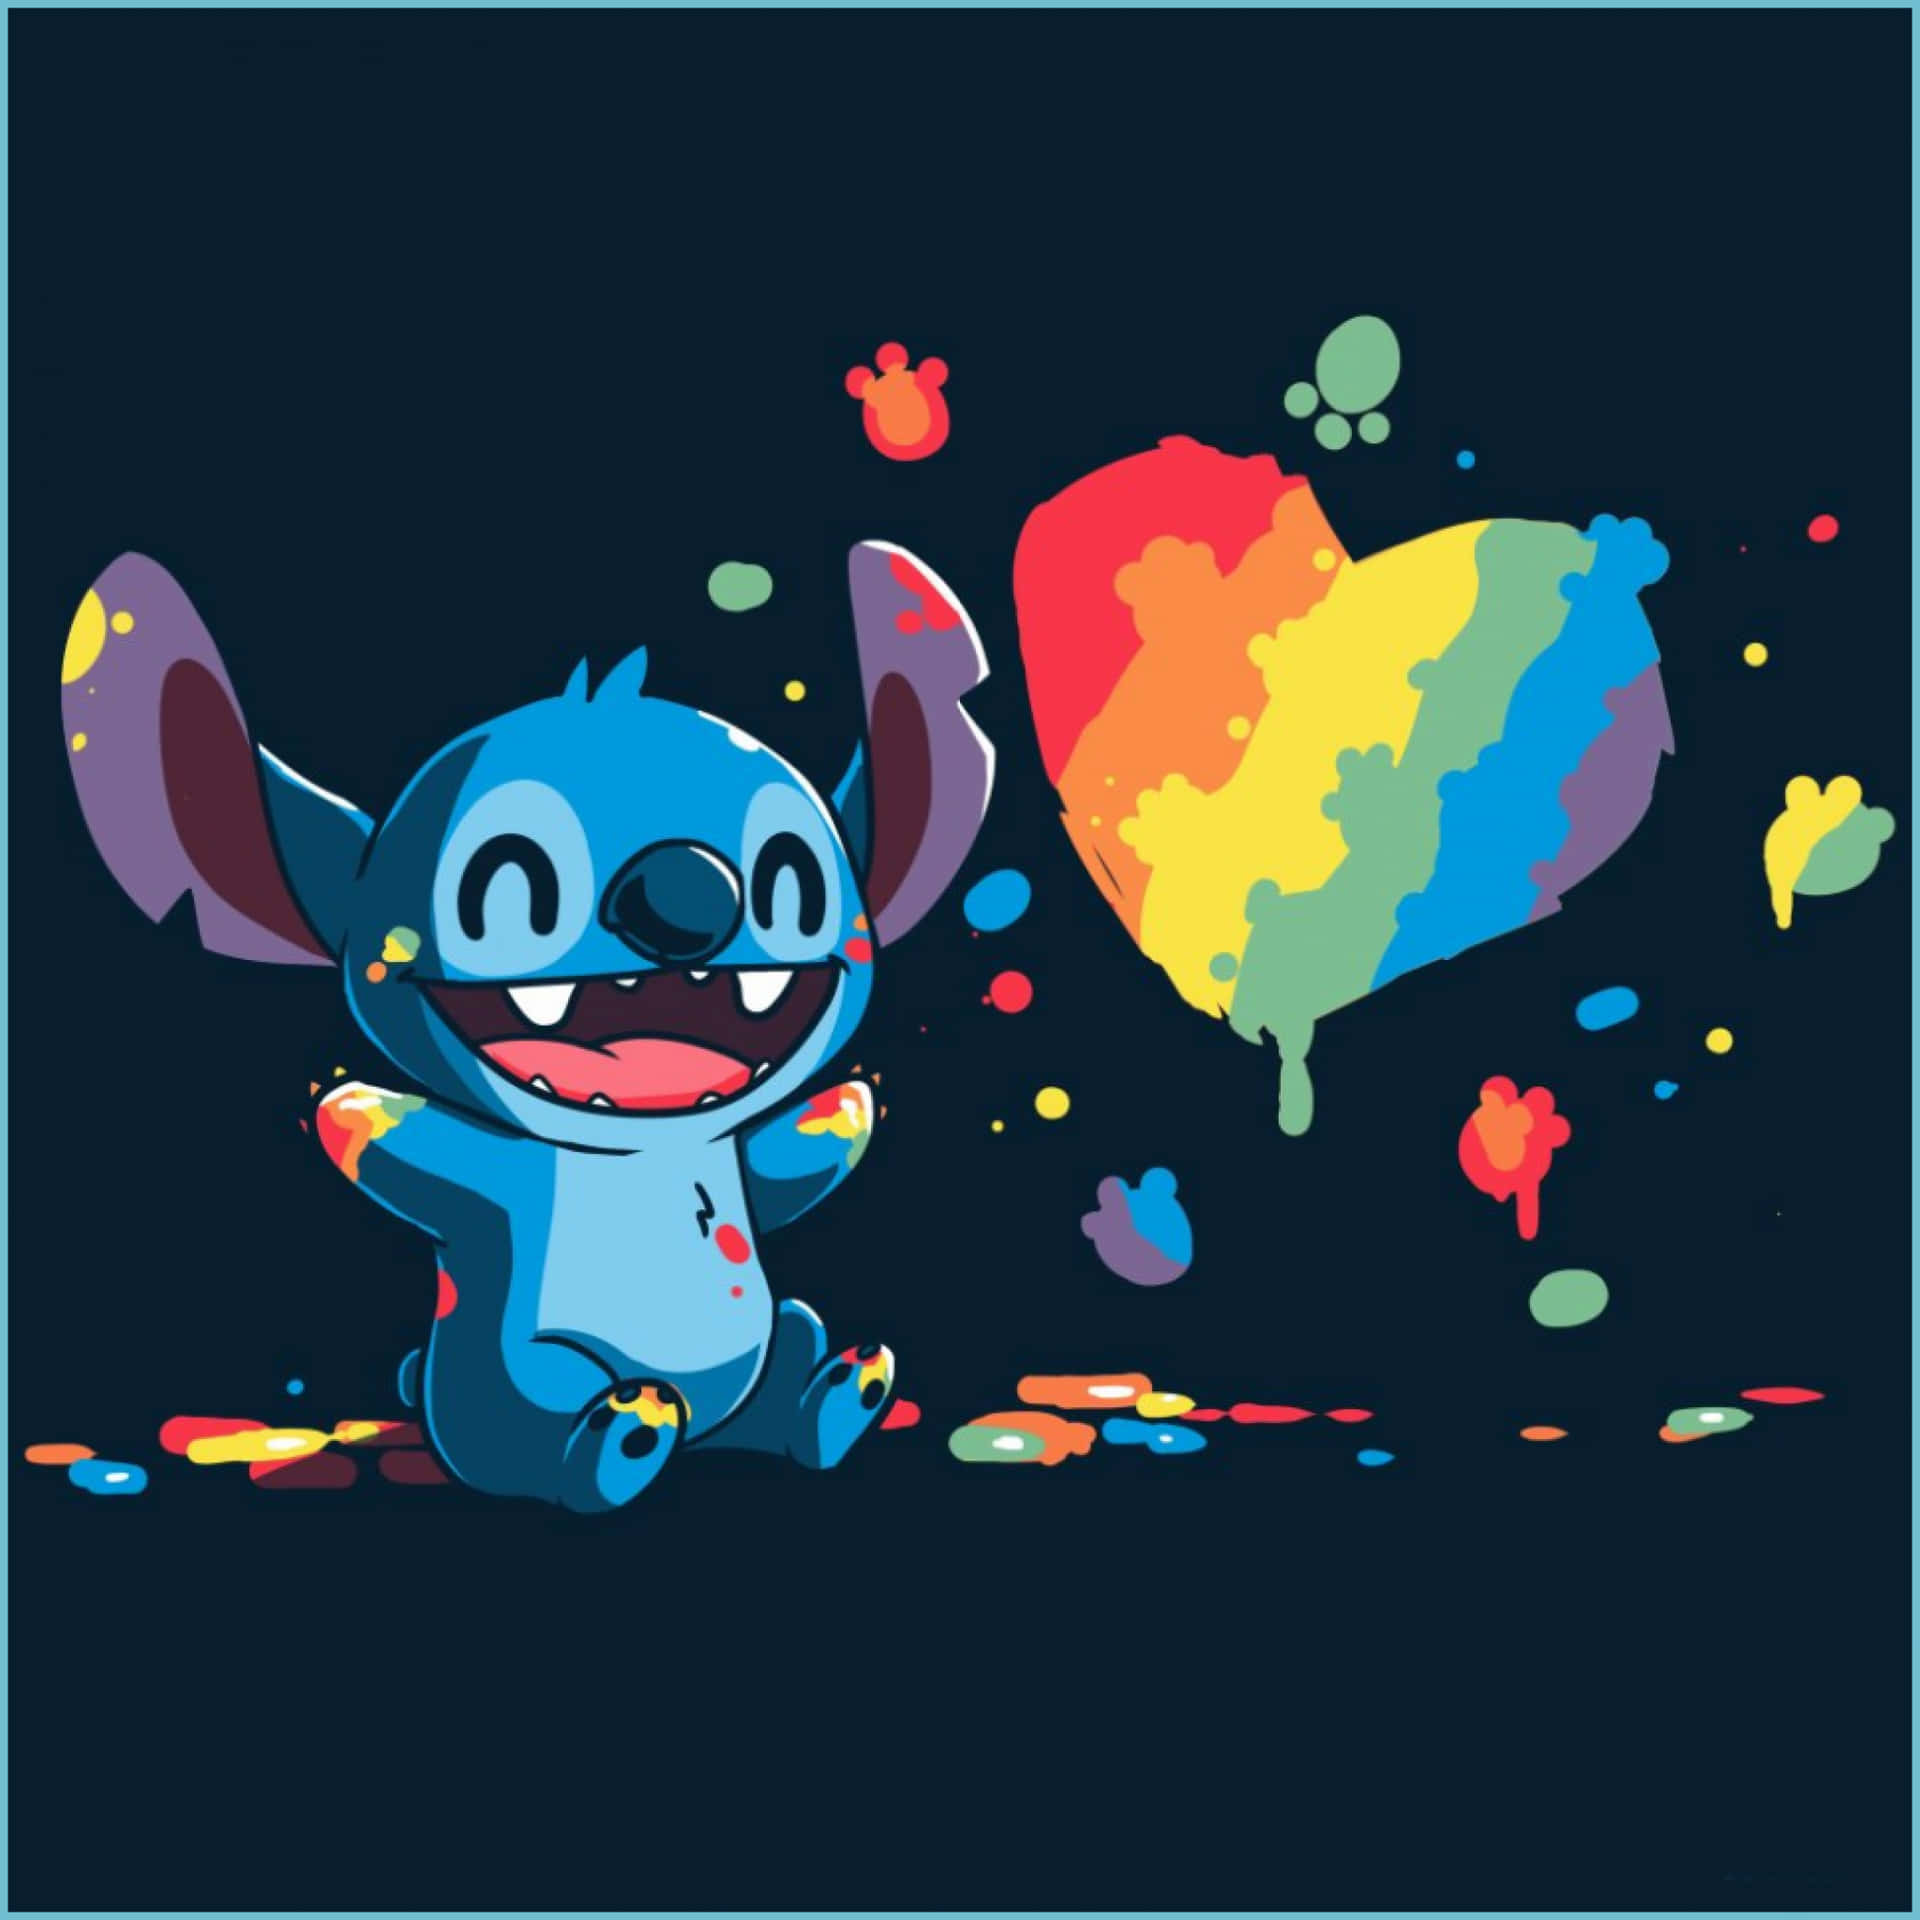 Adorable Stitch in Relaxing Mood Wallpaper